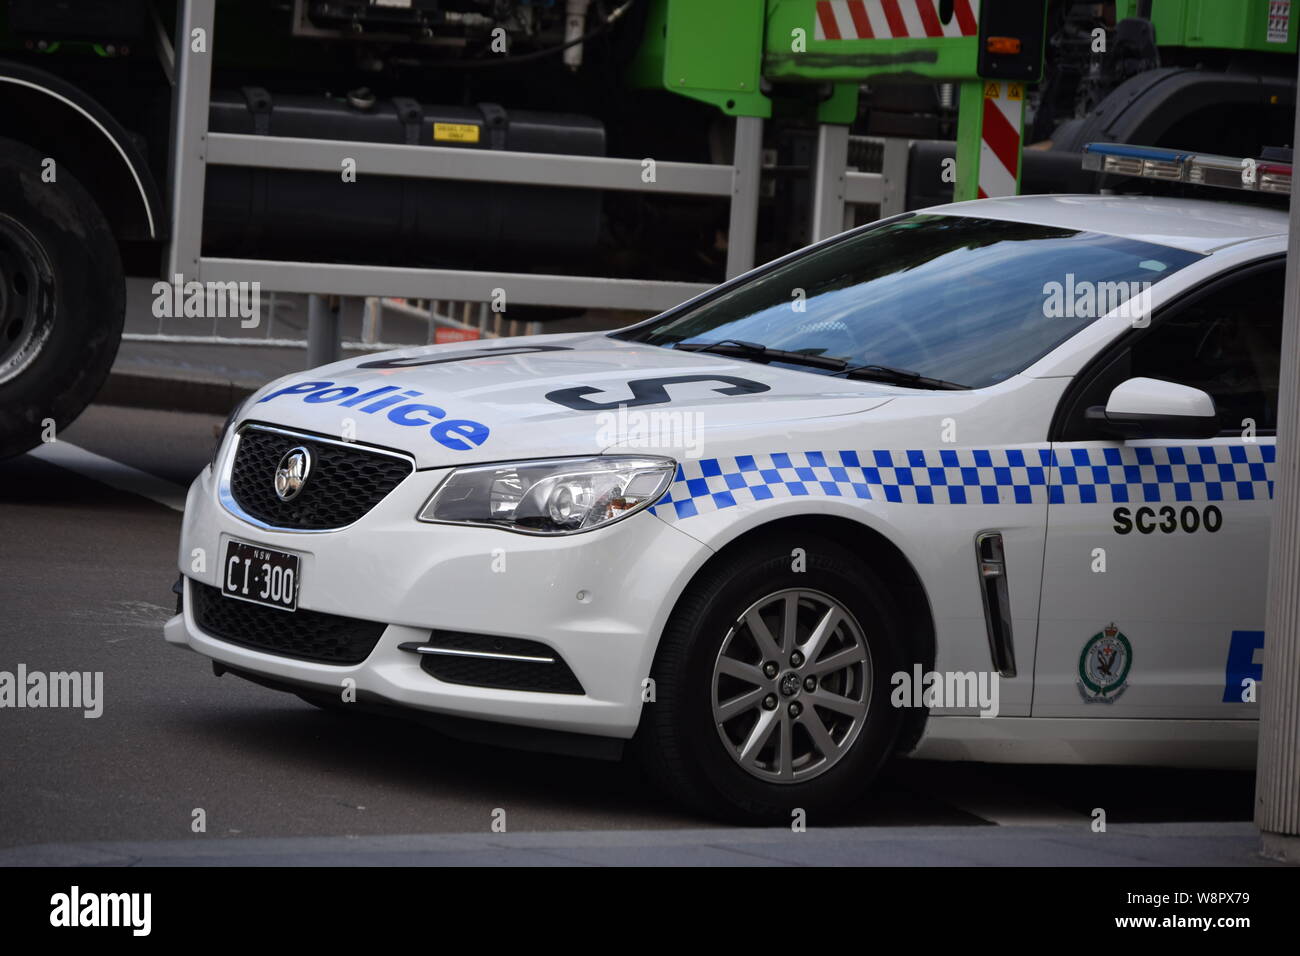 Police and Car Stock Photo